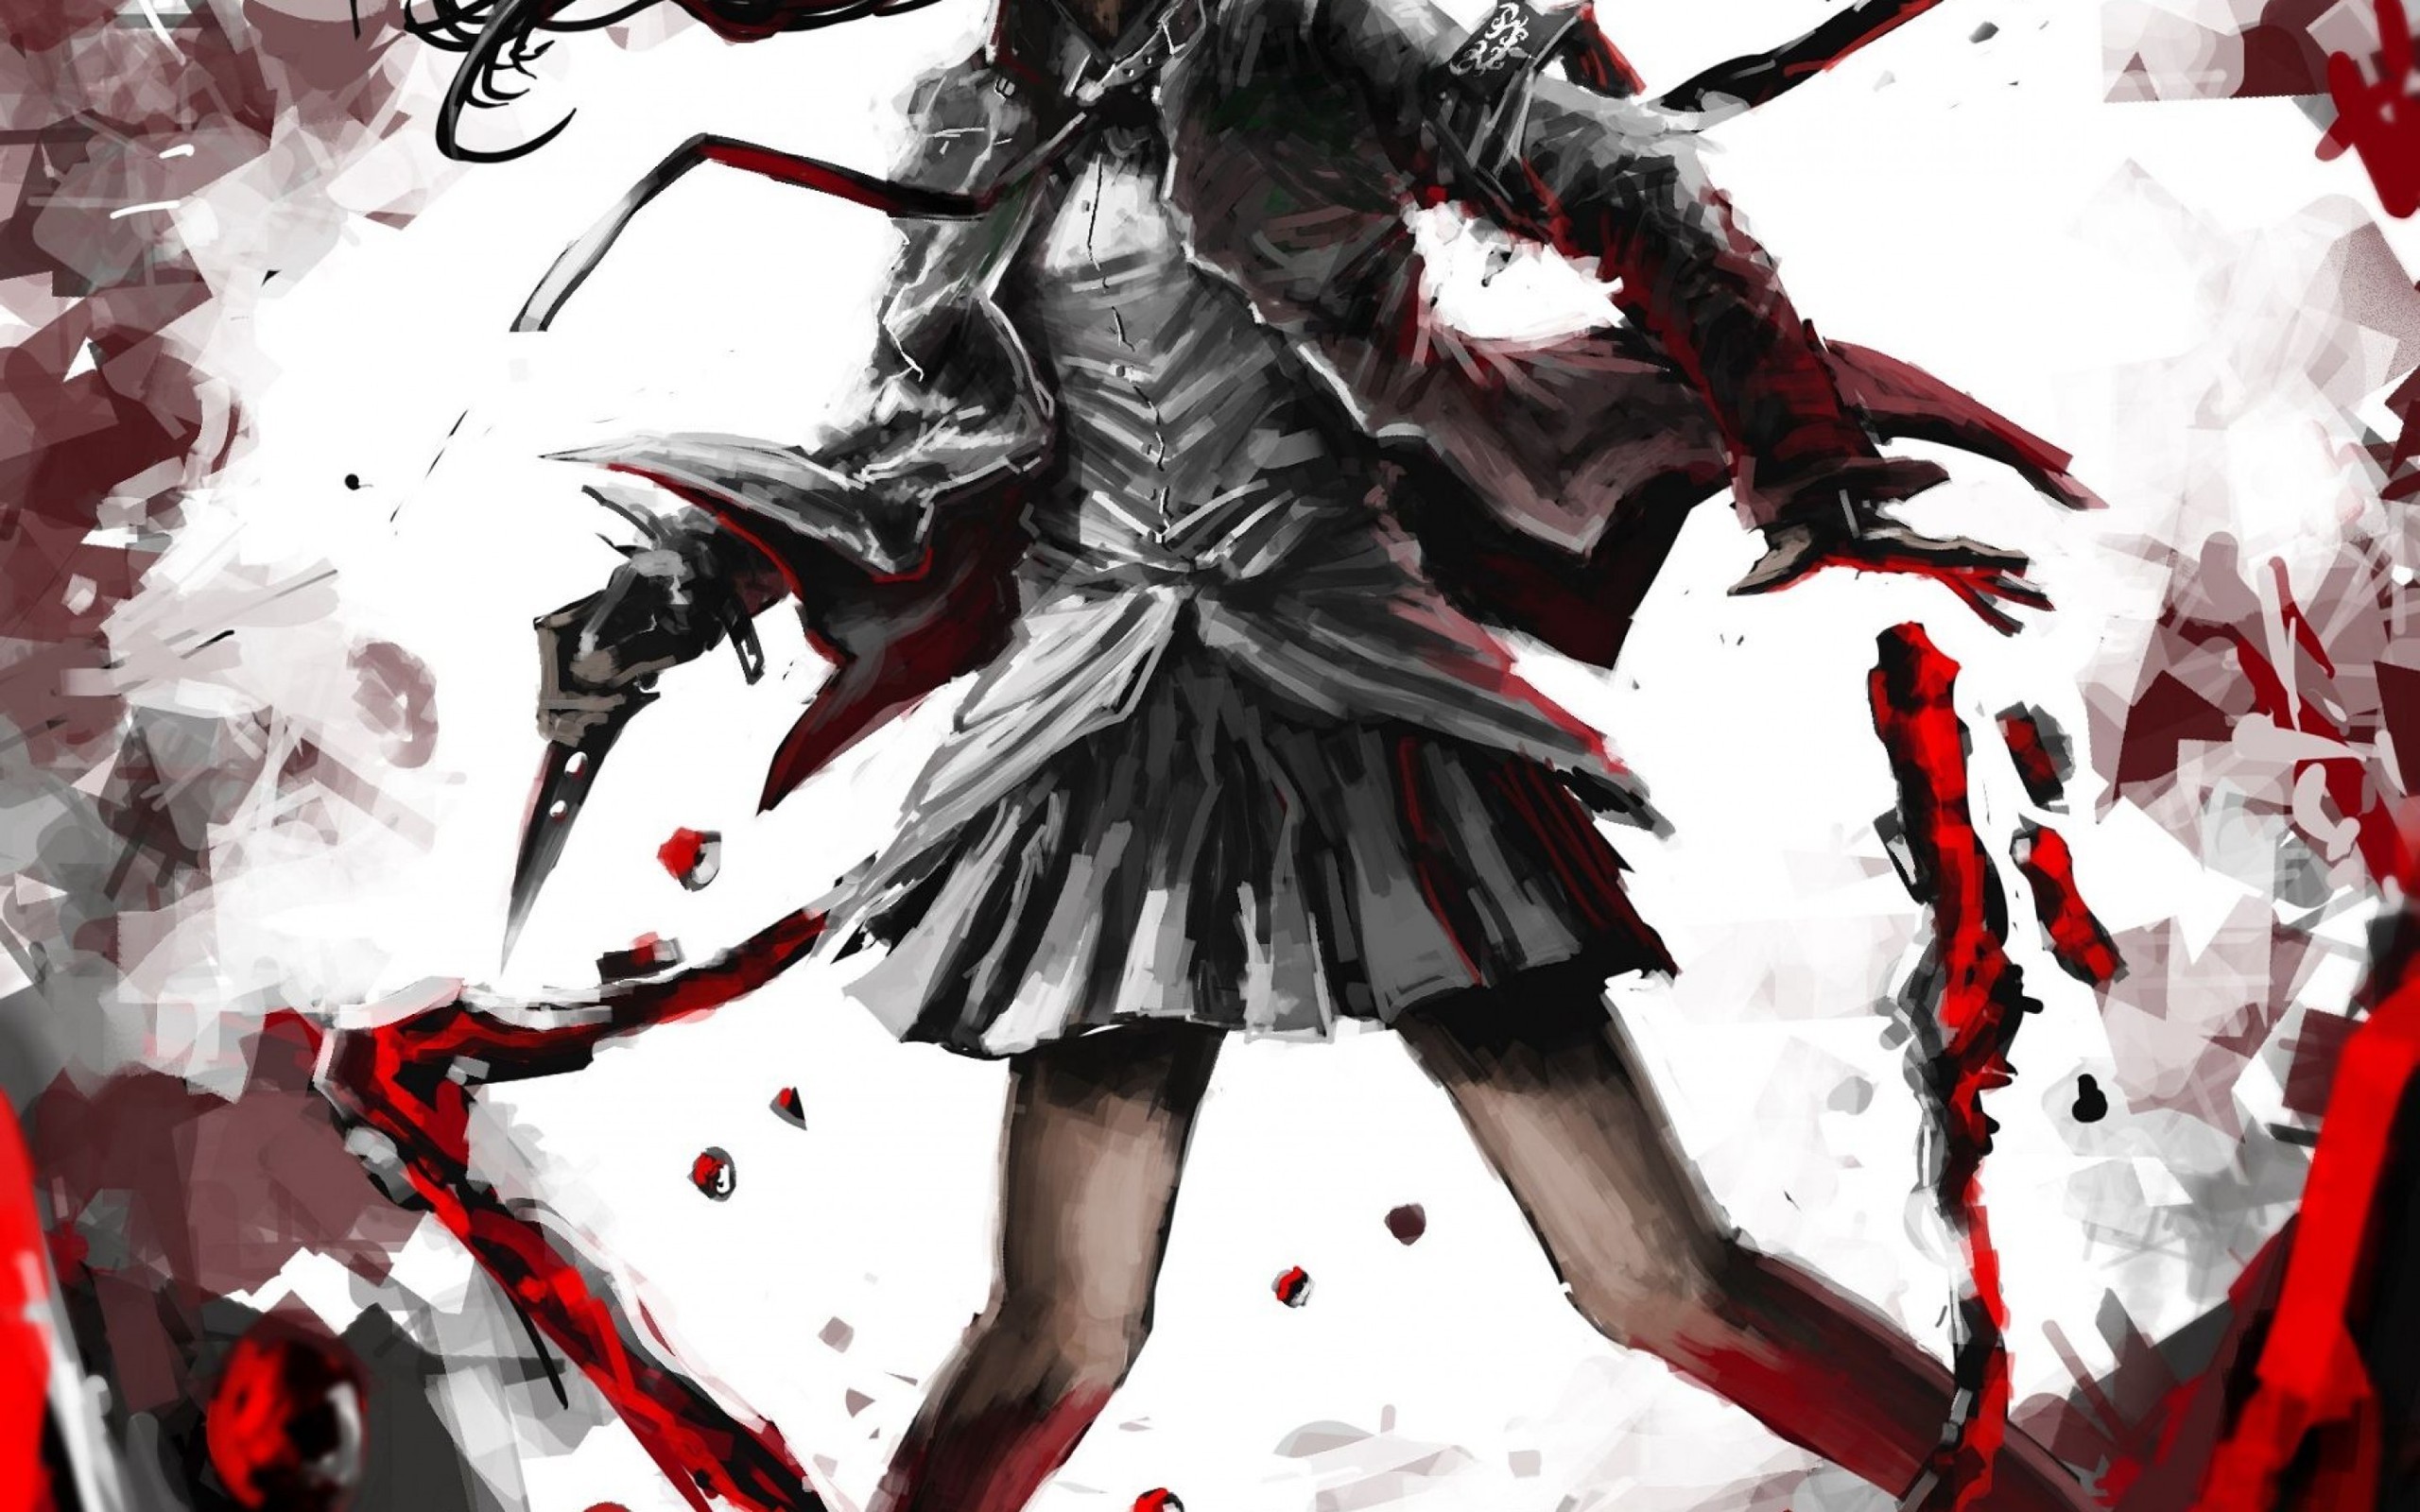 Horror Anime Wallpapers  Top 30 Best Horror Anime Wallpapers Download